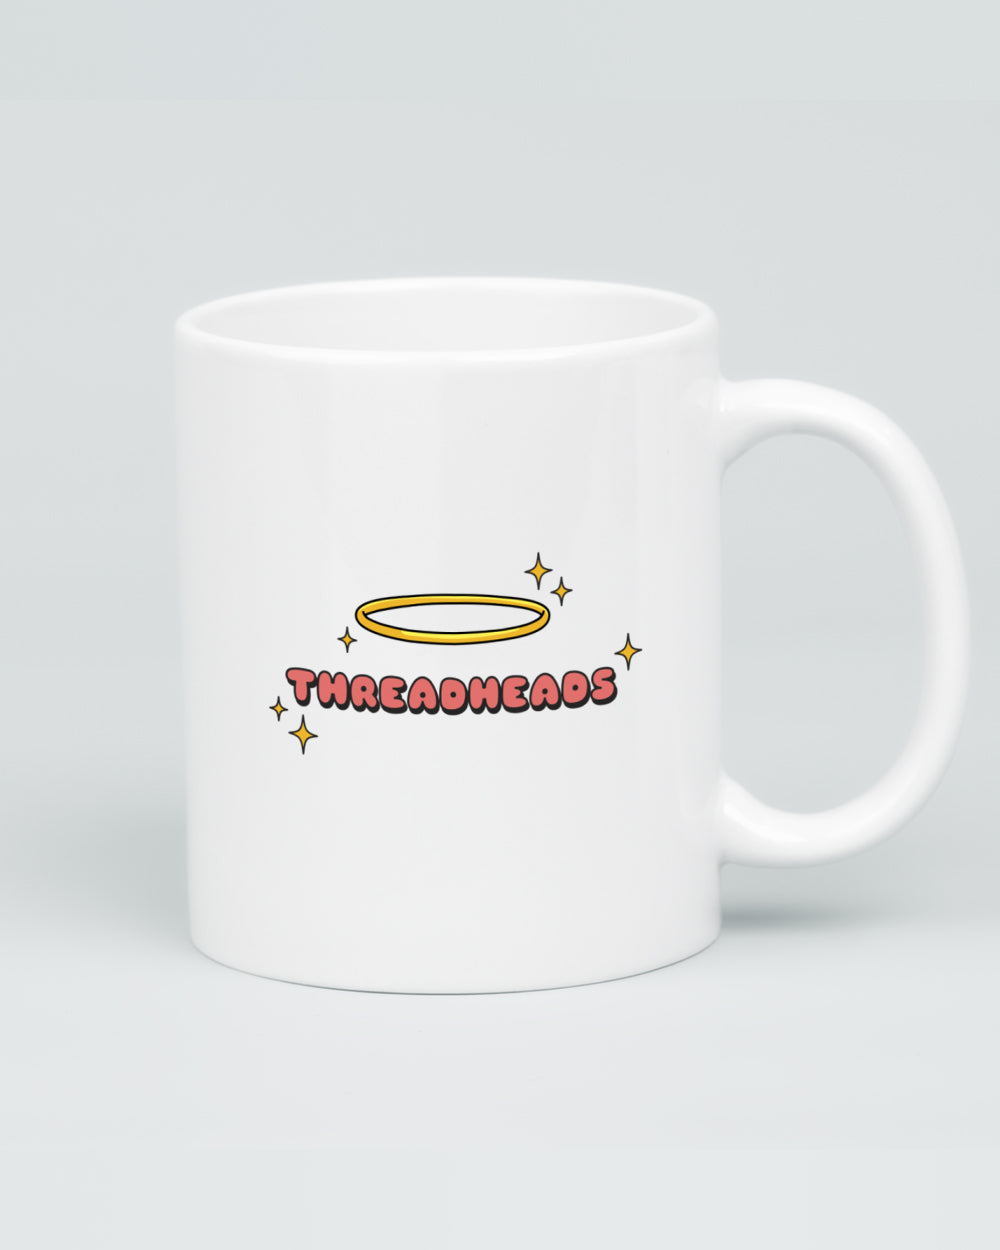 If You Don't Sin I Died for Nothing Mug | Threadheads